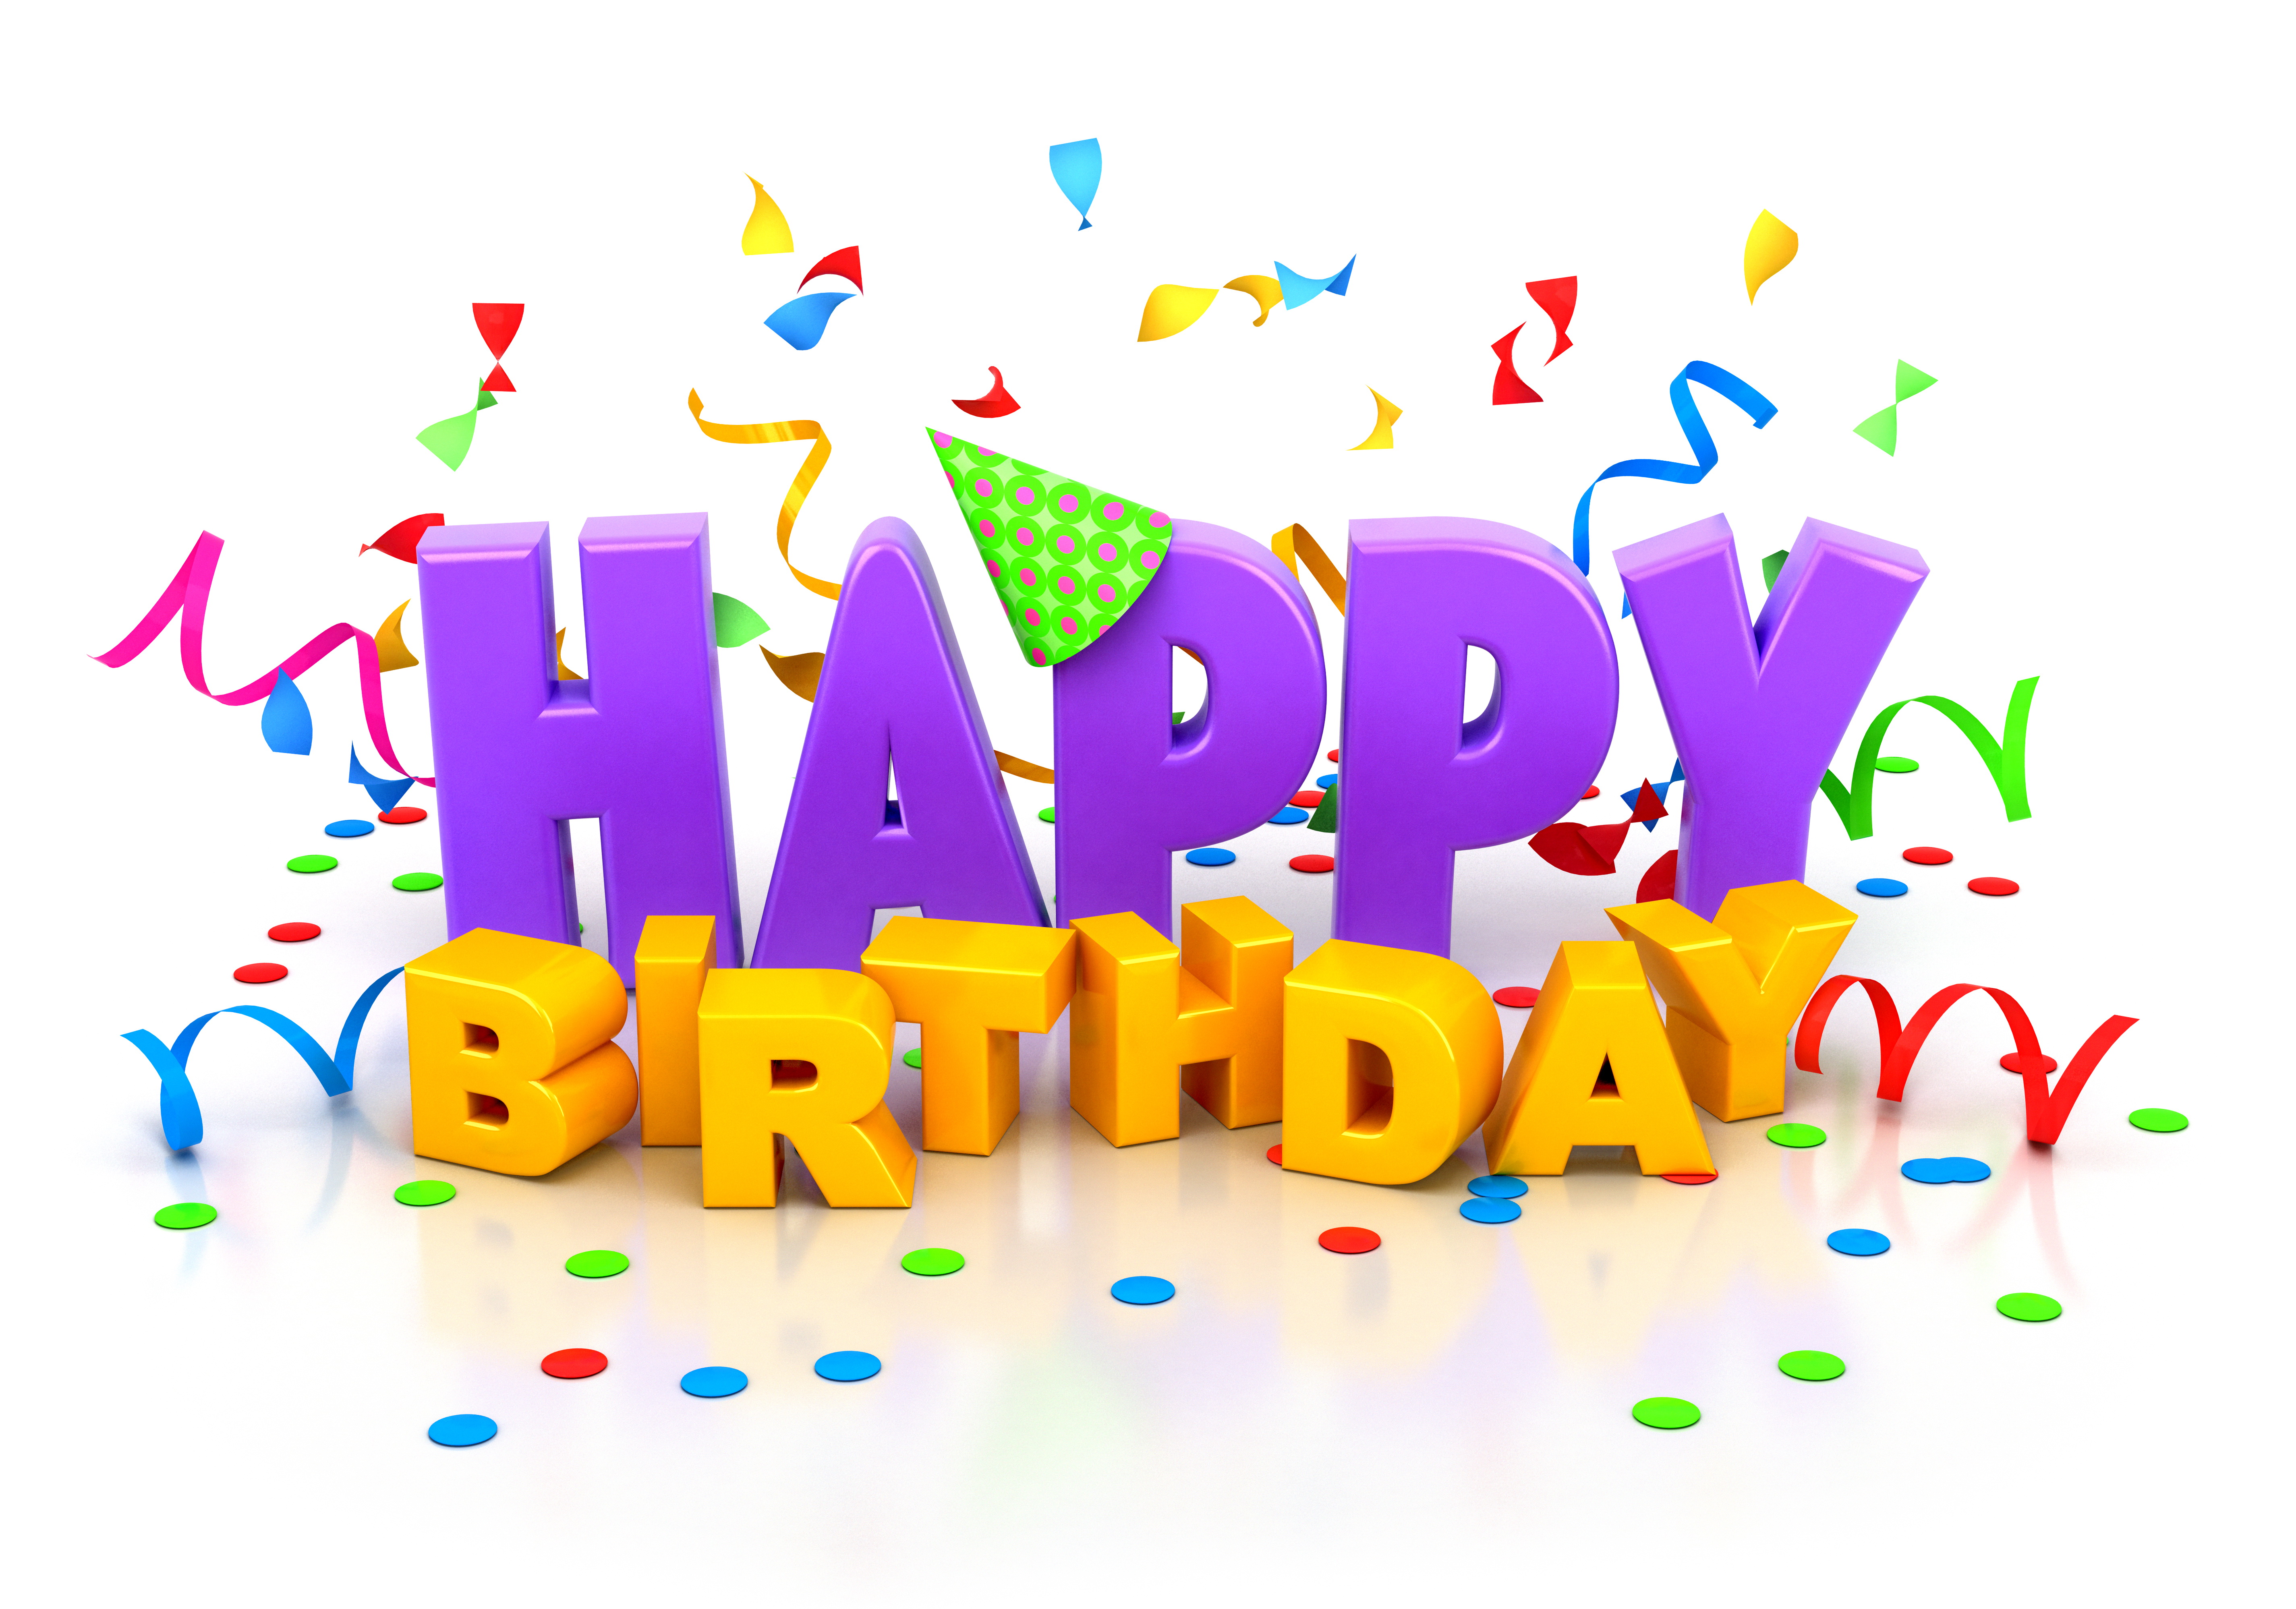 Wish your buddies happy birthday with thisol images jpg